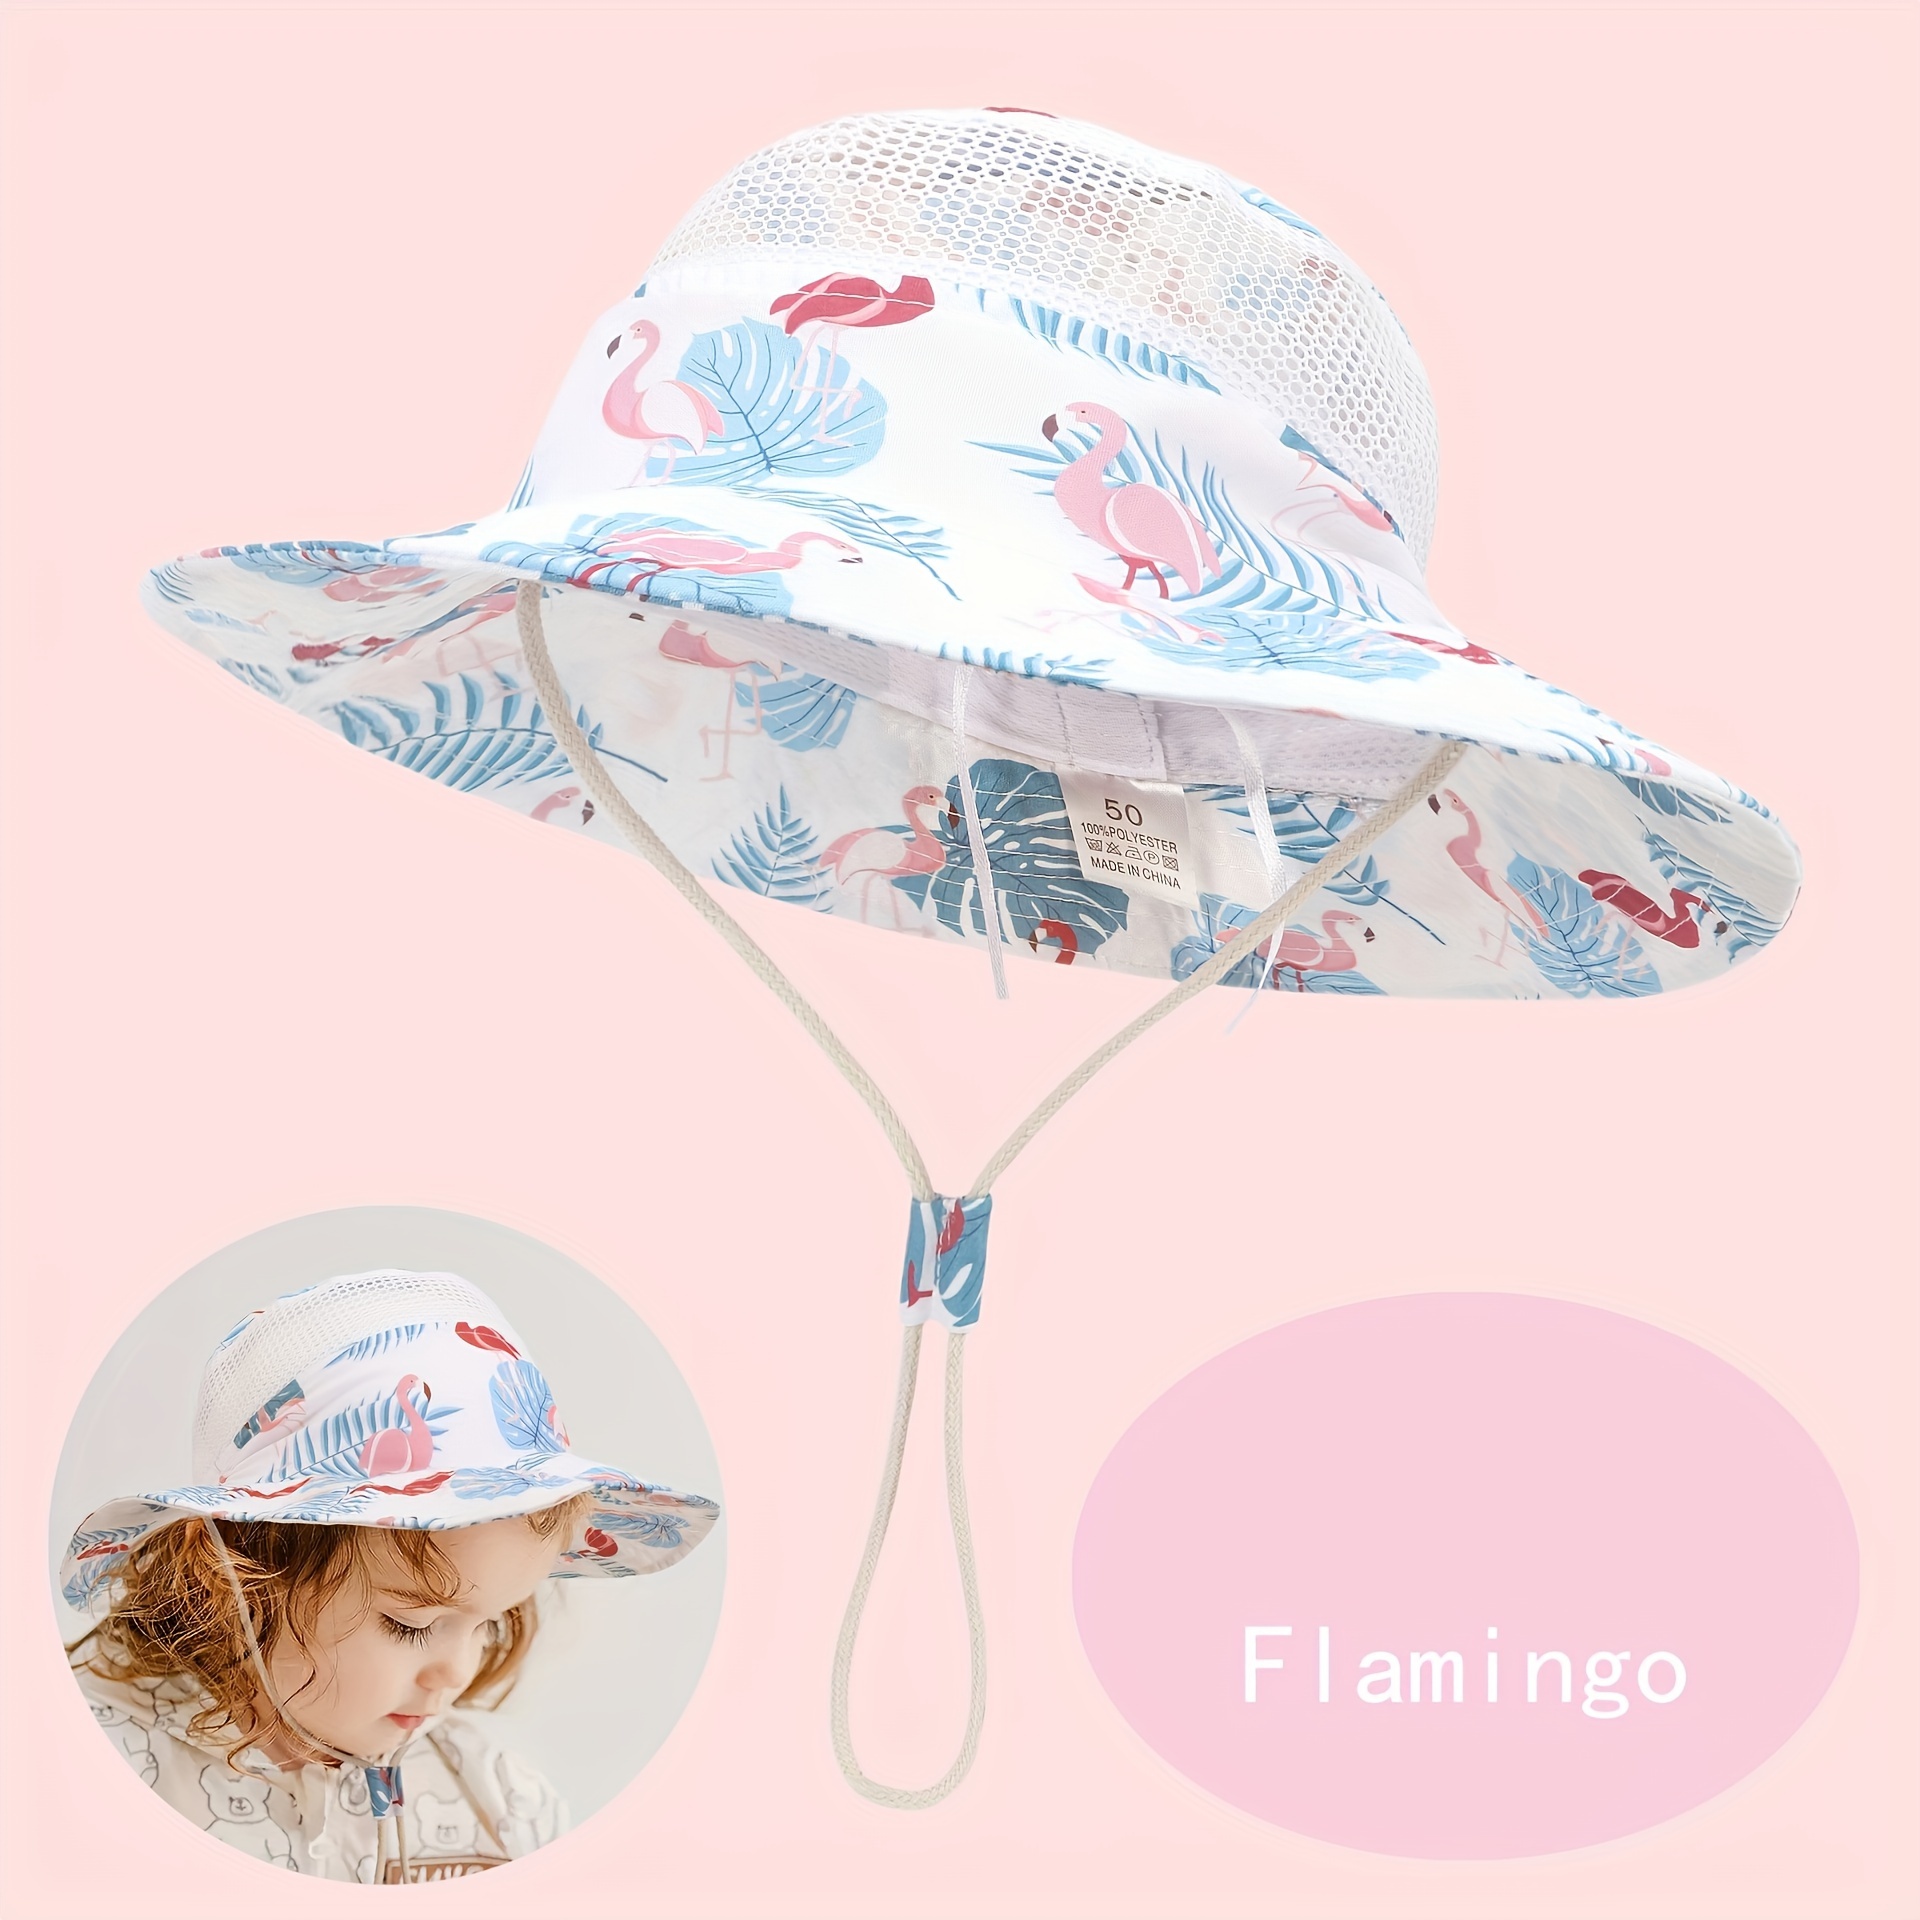 Cartoon Fishing Cap For Kids Floppy Bucket Hat Infant For Boys And